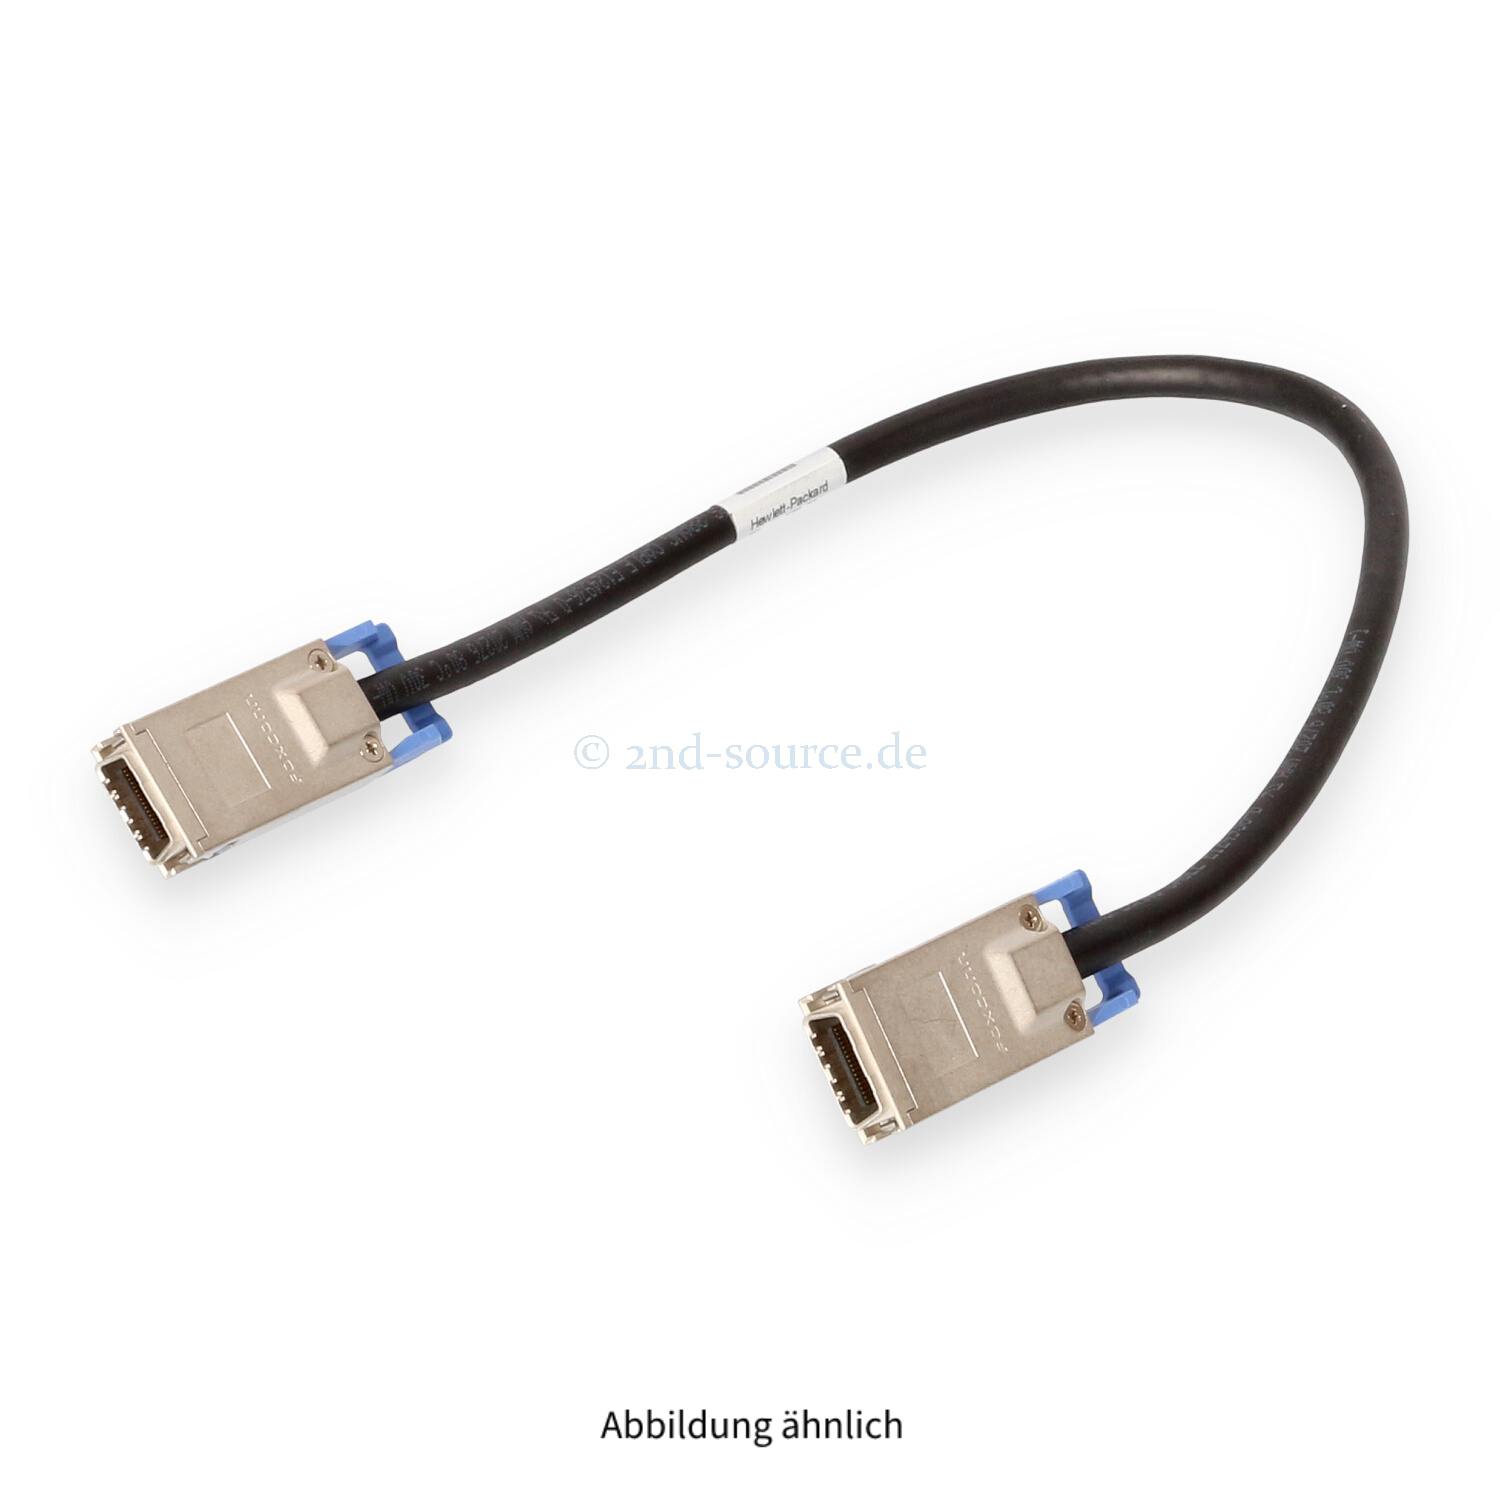 HPE 0.50m CX4 10GbE SFF-8470 to CX4 10GbE SFF-8470 InfiniBand Cable 444477-B21 444475-001 446052-001